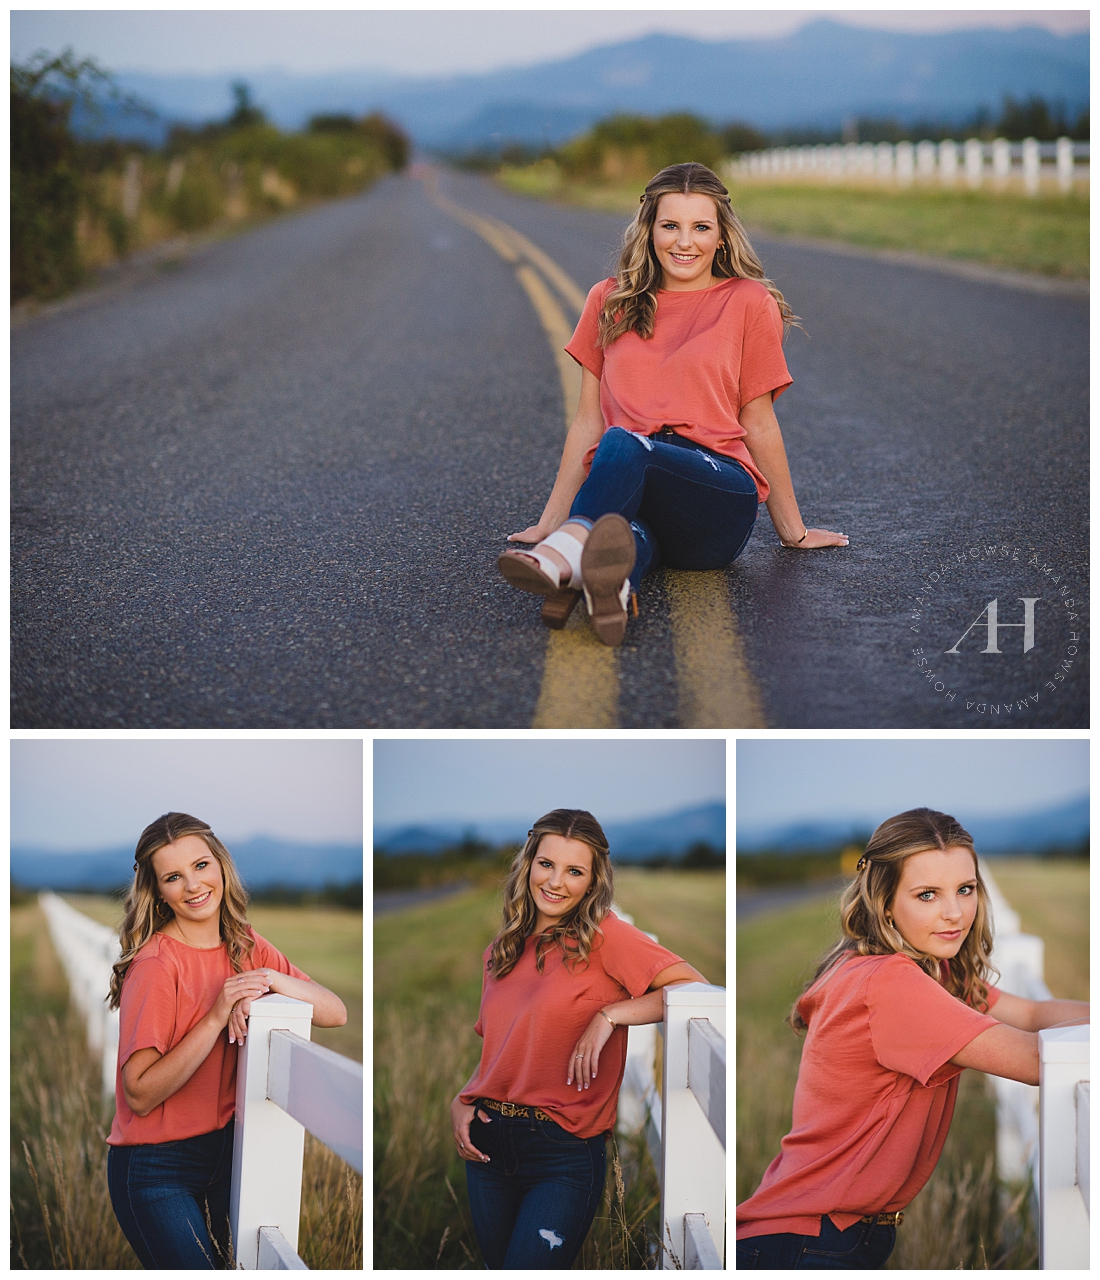 Country Road Senior Portraits | How to Pose for Outdoor Portraits, Senior Posing in the Middle of a Country Road, Senior Photos with Rustic Fences, Outfit Inspo | Photographed by Tacoma's Best Senior Photographer Amanda Howse